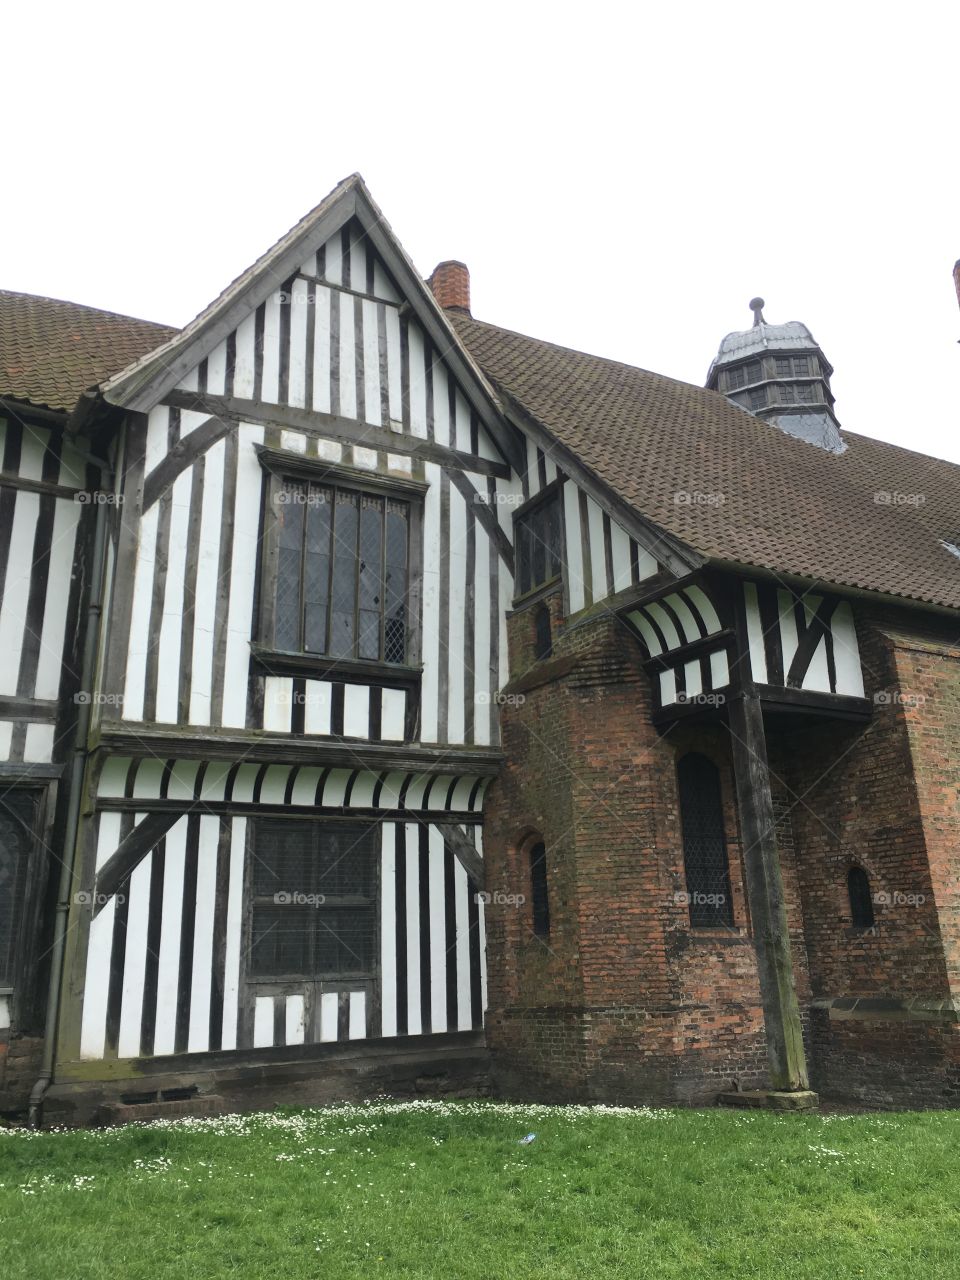 Exterior view of the medieval Manor House at Gainsborough Old Hall showing timber framework, windows, roofing and brickwork 